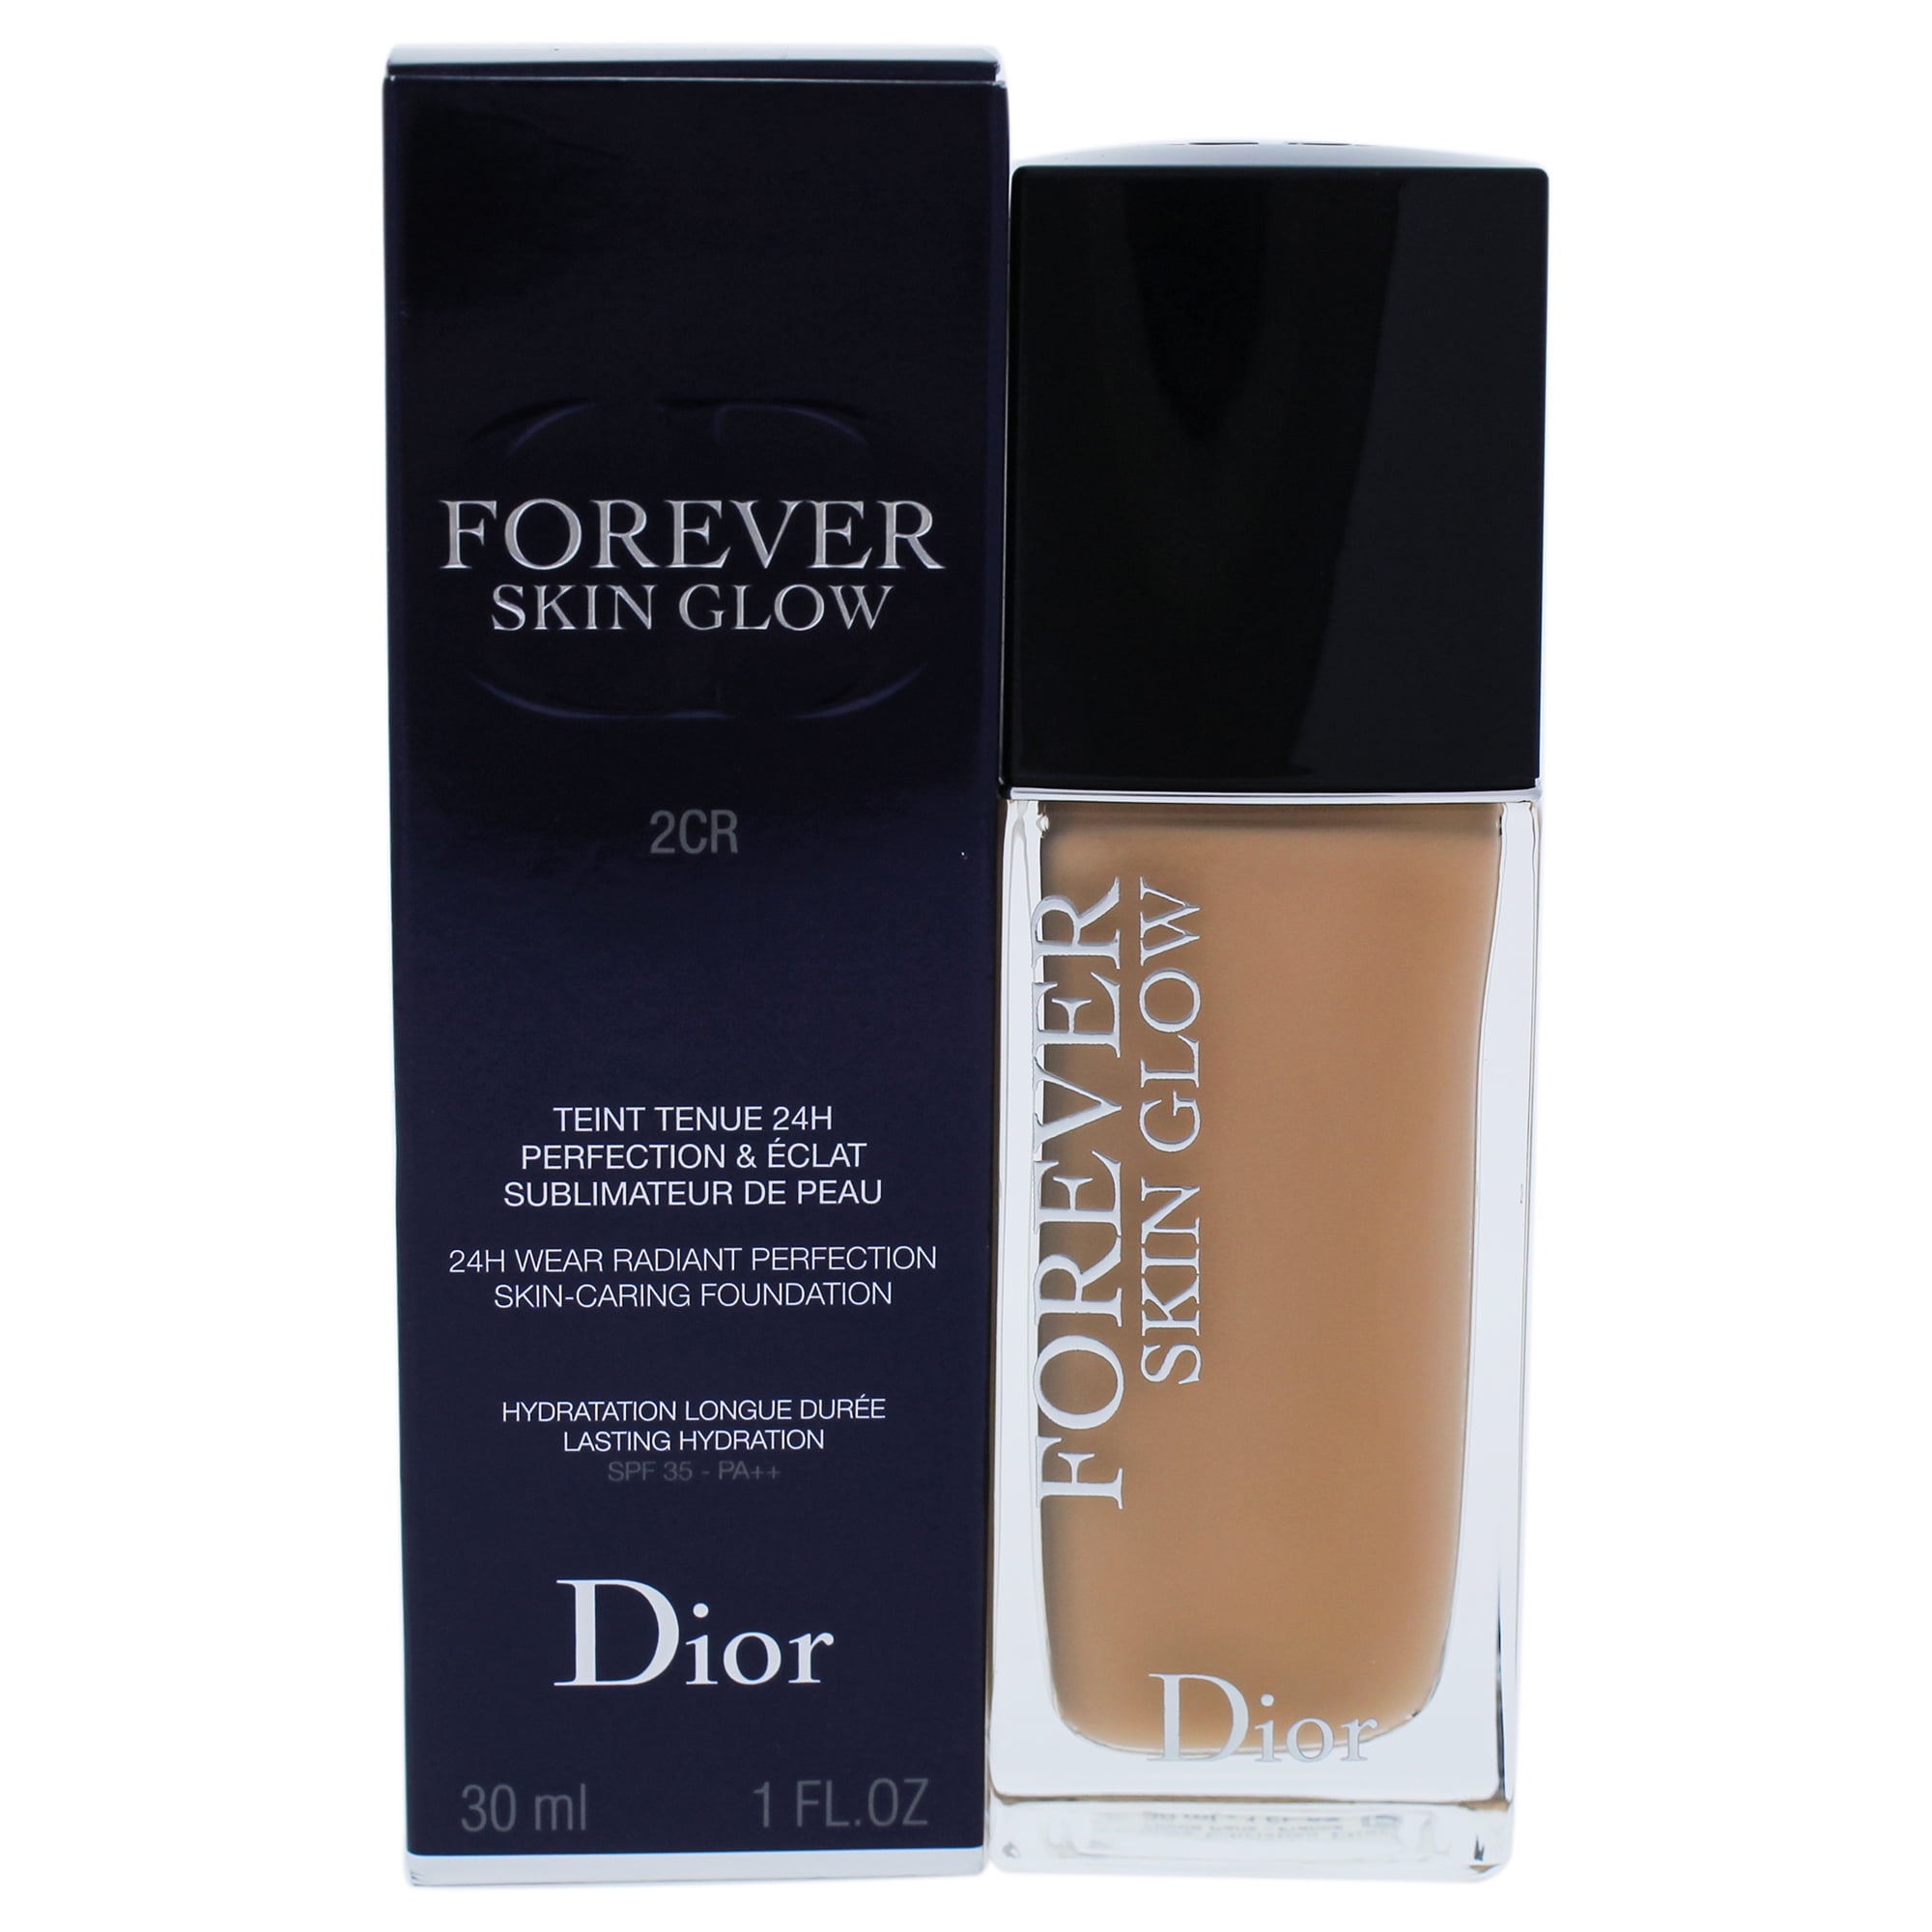 Dior Forever Skin Glow Foundation SPF 35 2CR Cool RosyGlow by